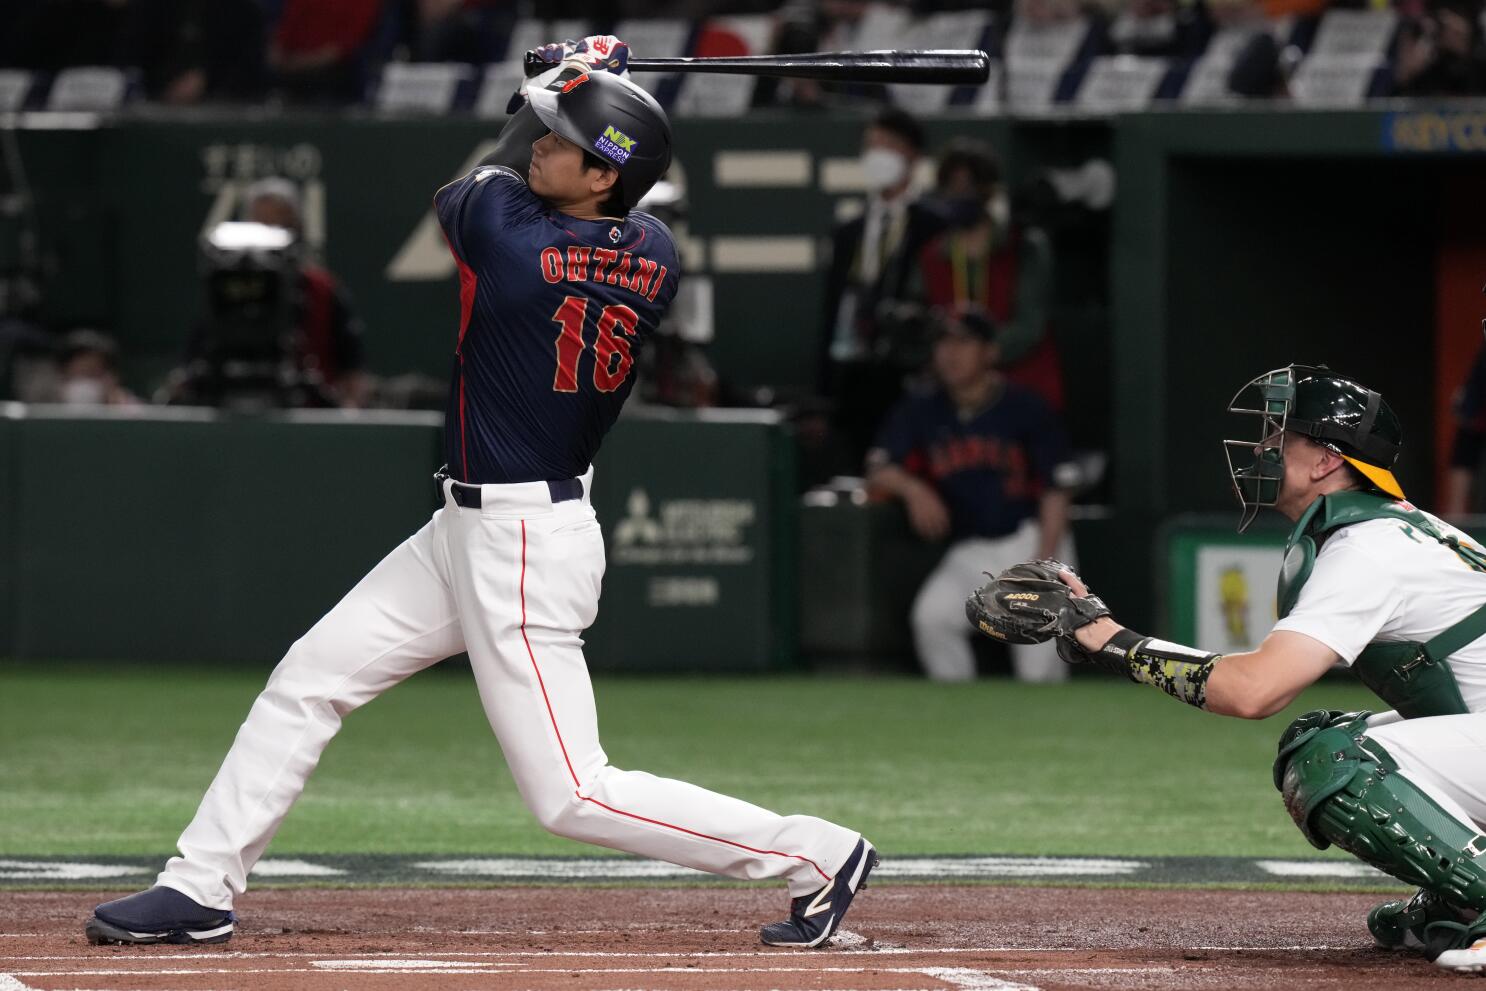 World Baseball Classic: Highlights from Japan, Netherlands and